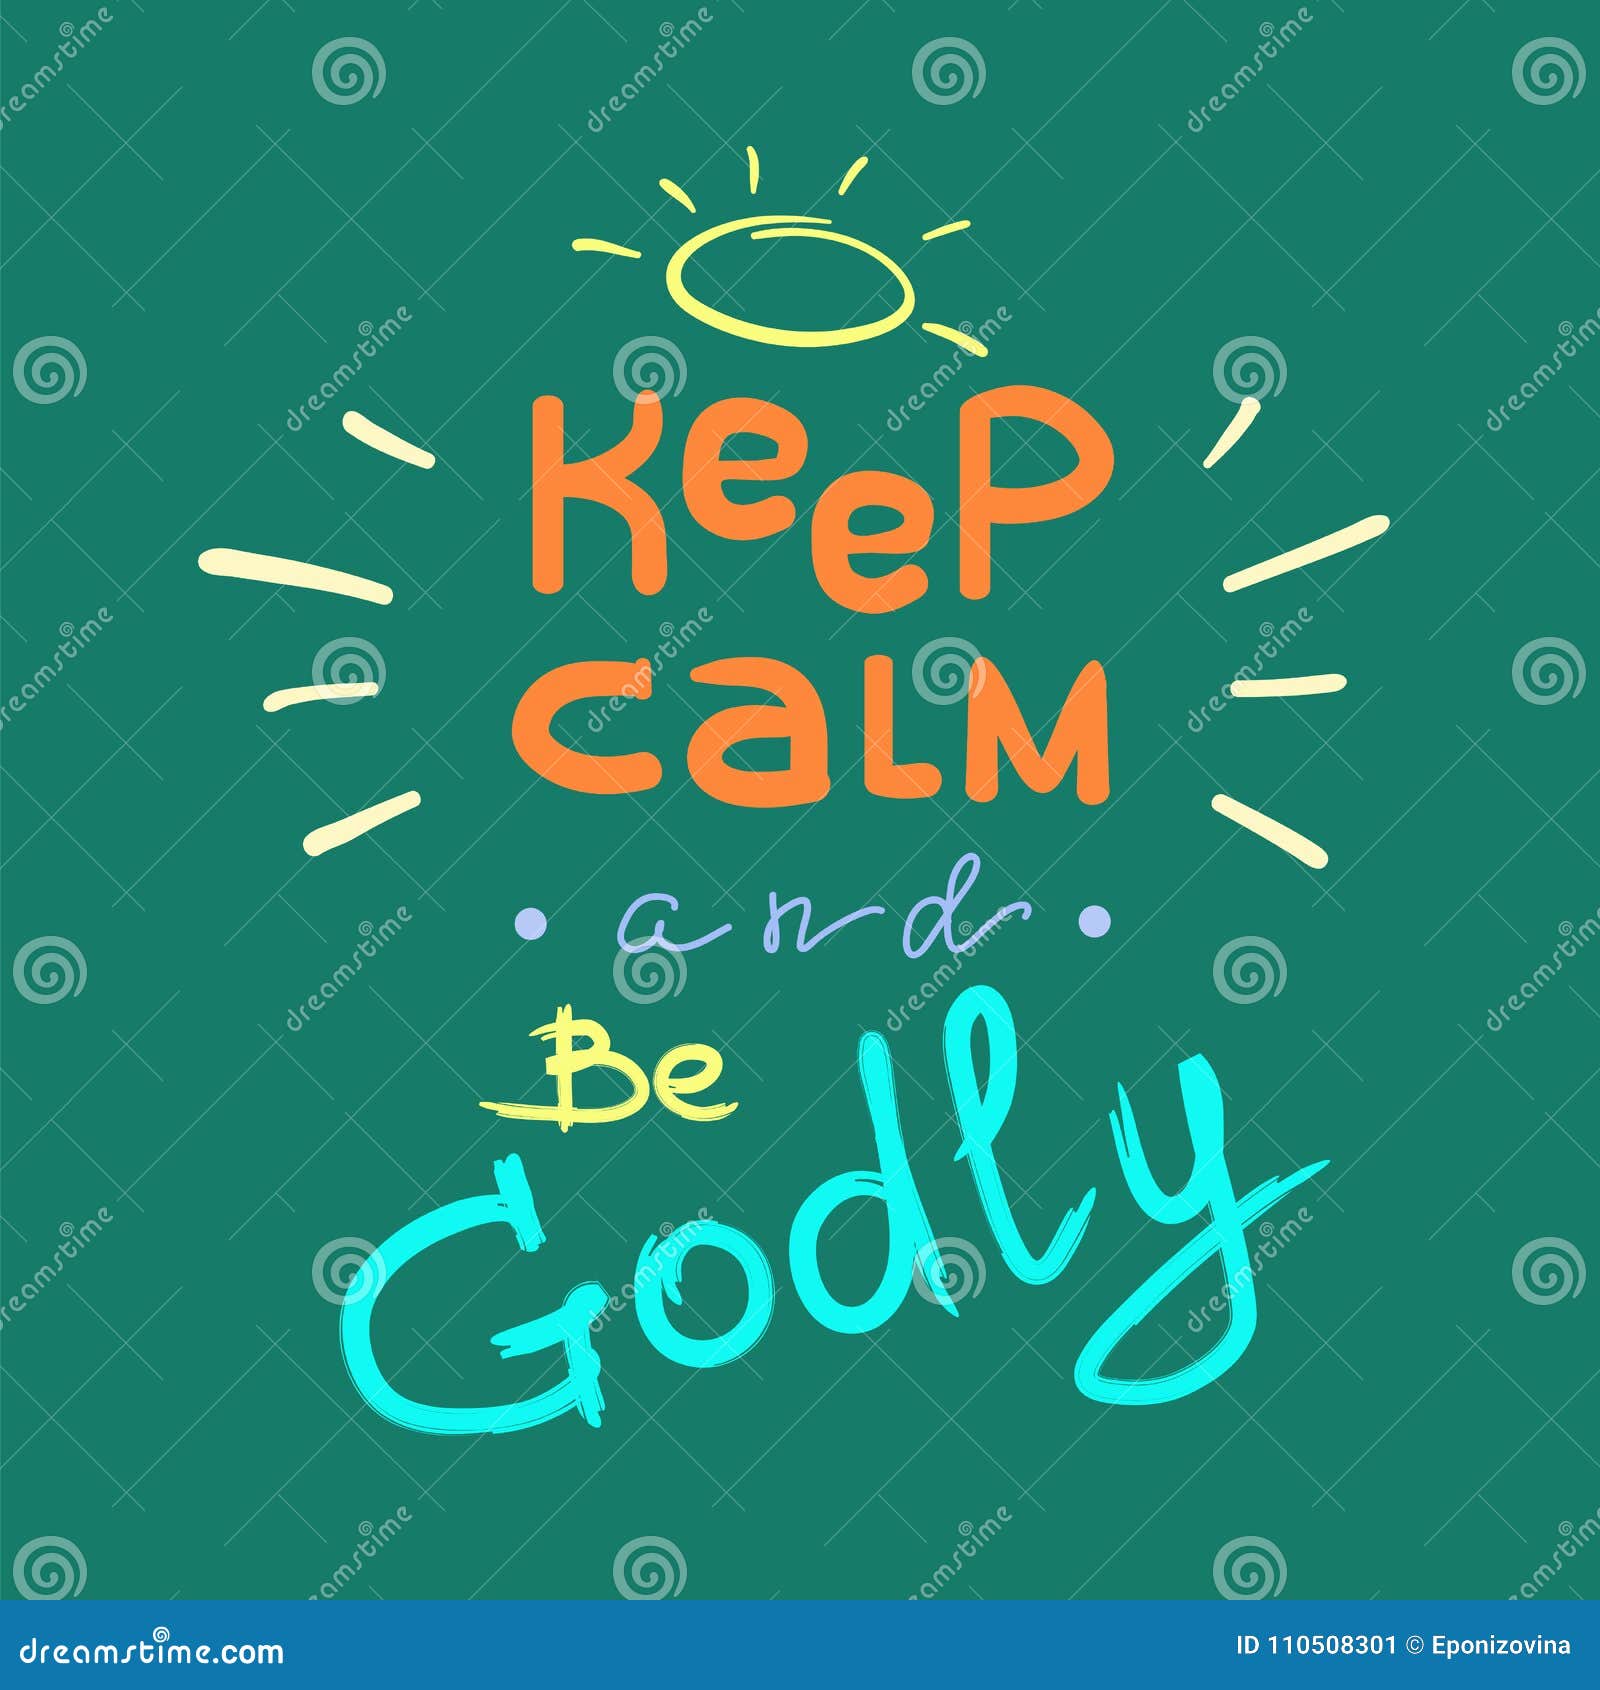 keep calm and be godly